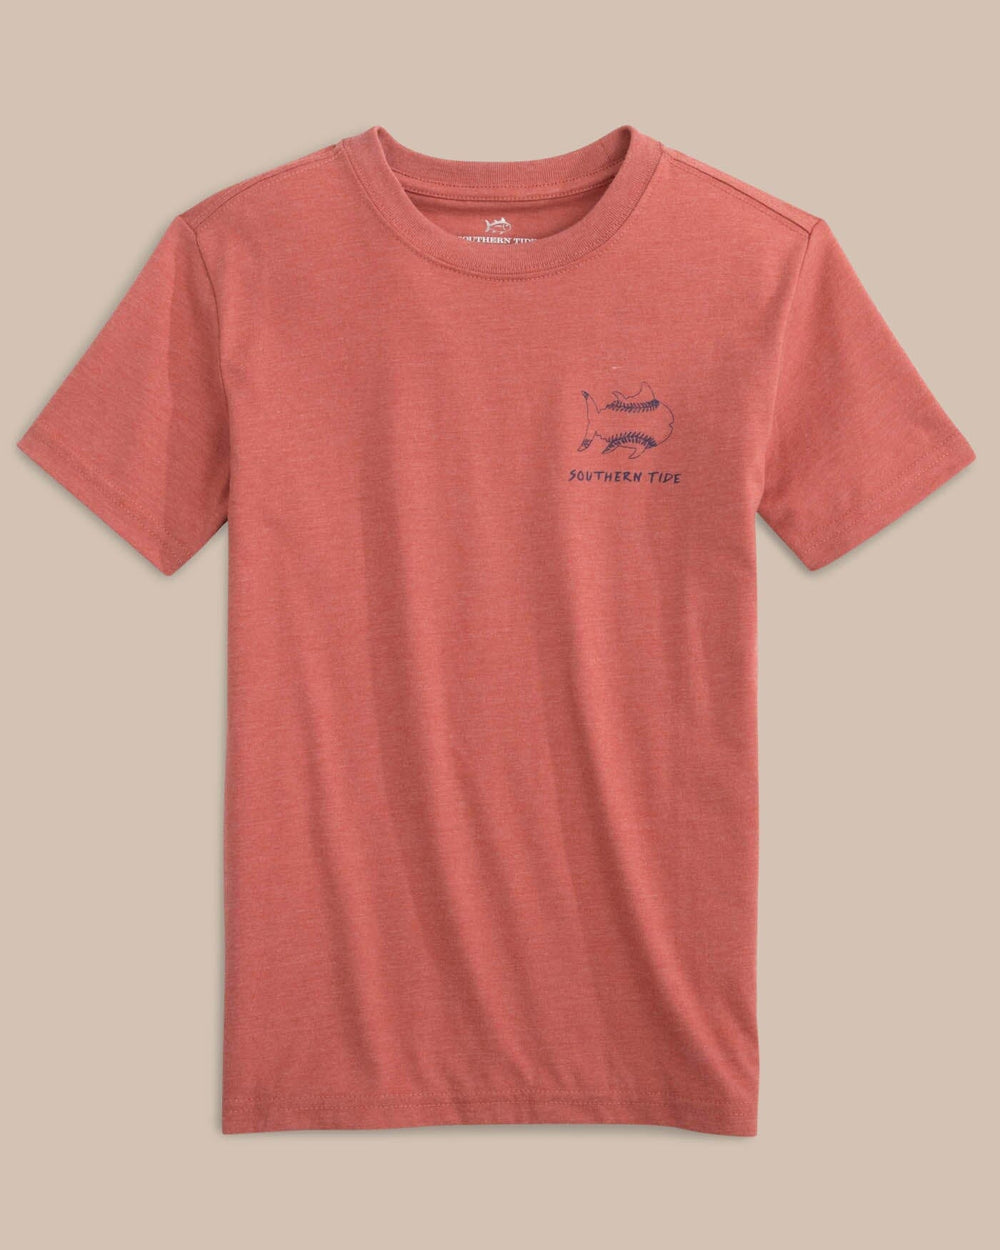 The front view of the Southern Tide Kids Sketched Baseball Heather T-Shirt by Southern Tide - Heather Dusty Coral